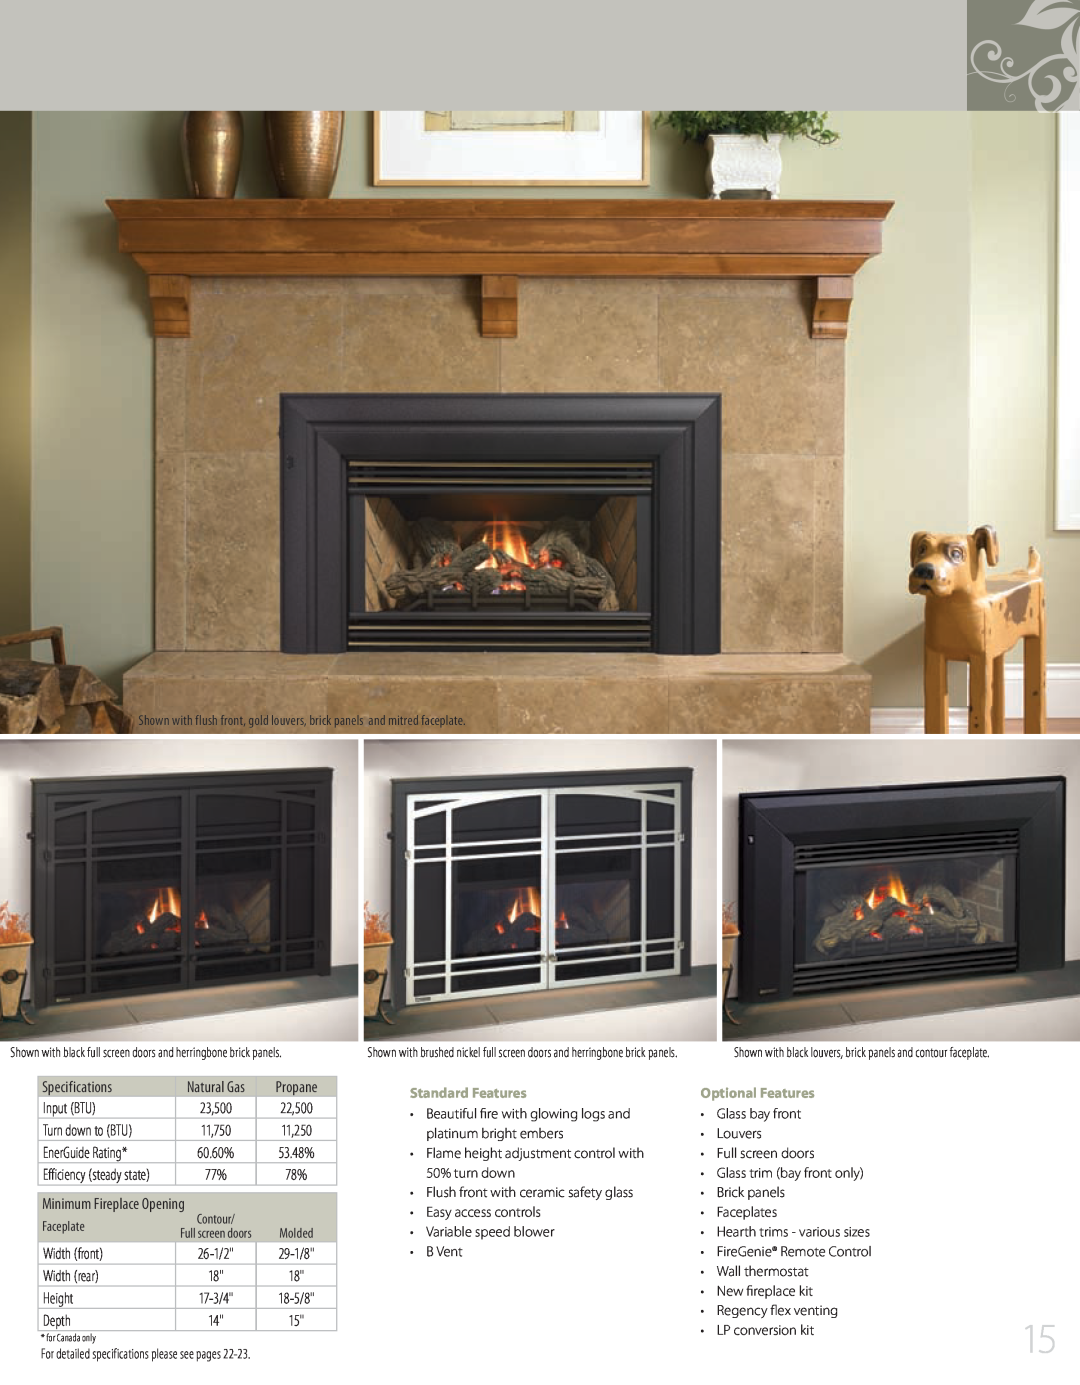 Regency 944-072, L234 manual Propane, Standard Features, Optional Features 